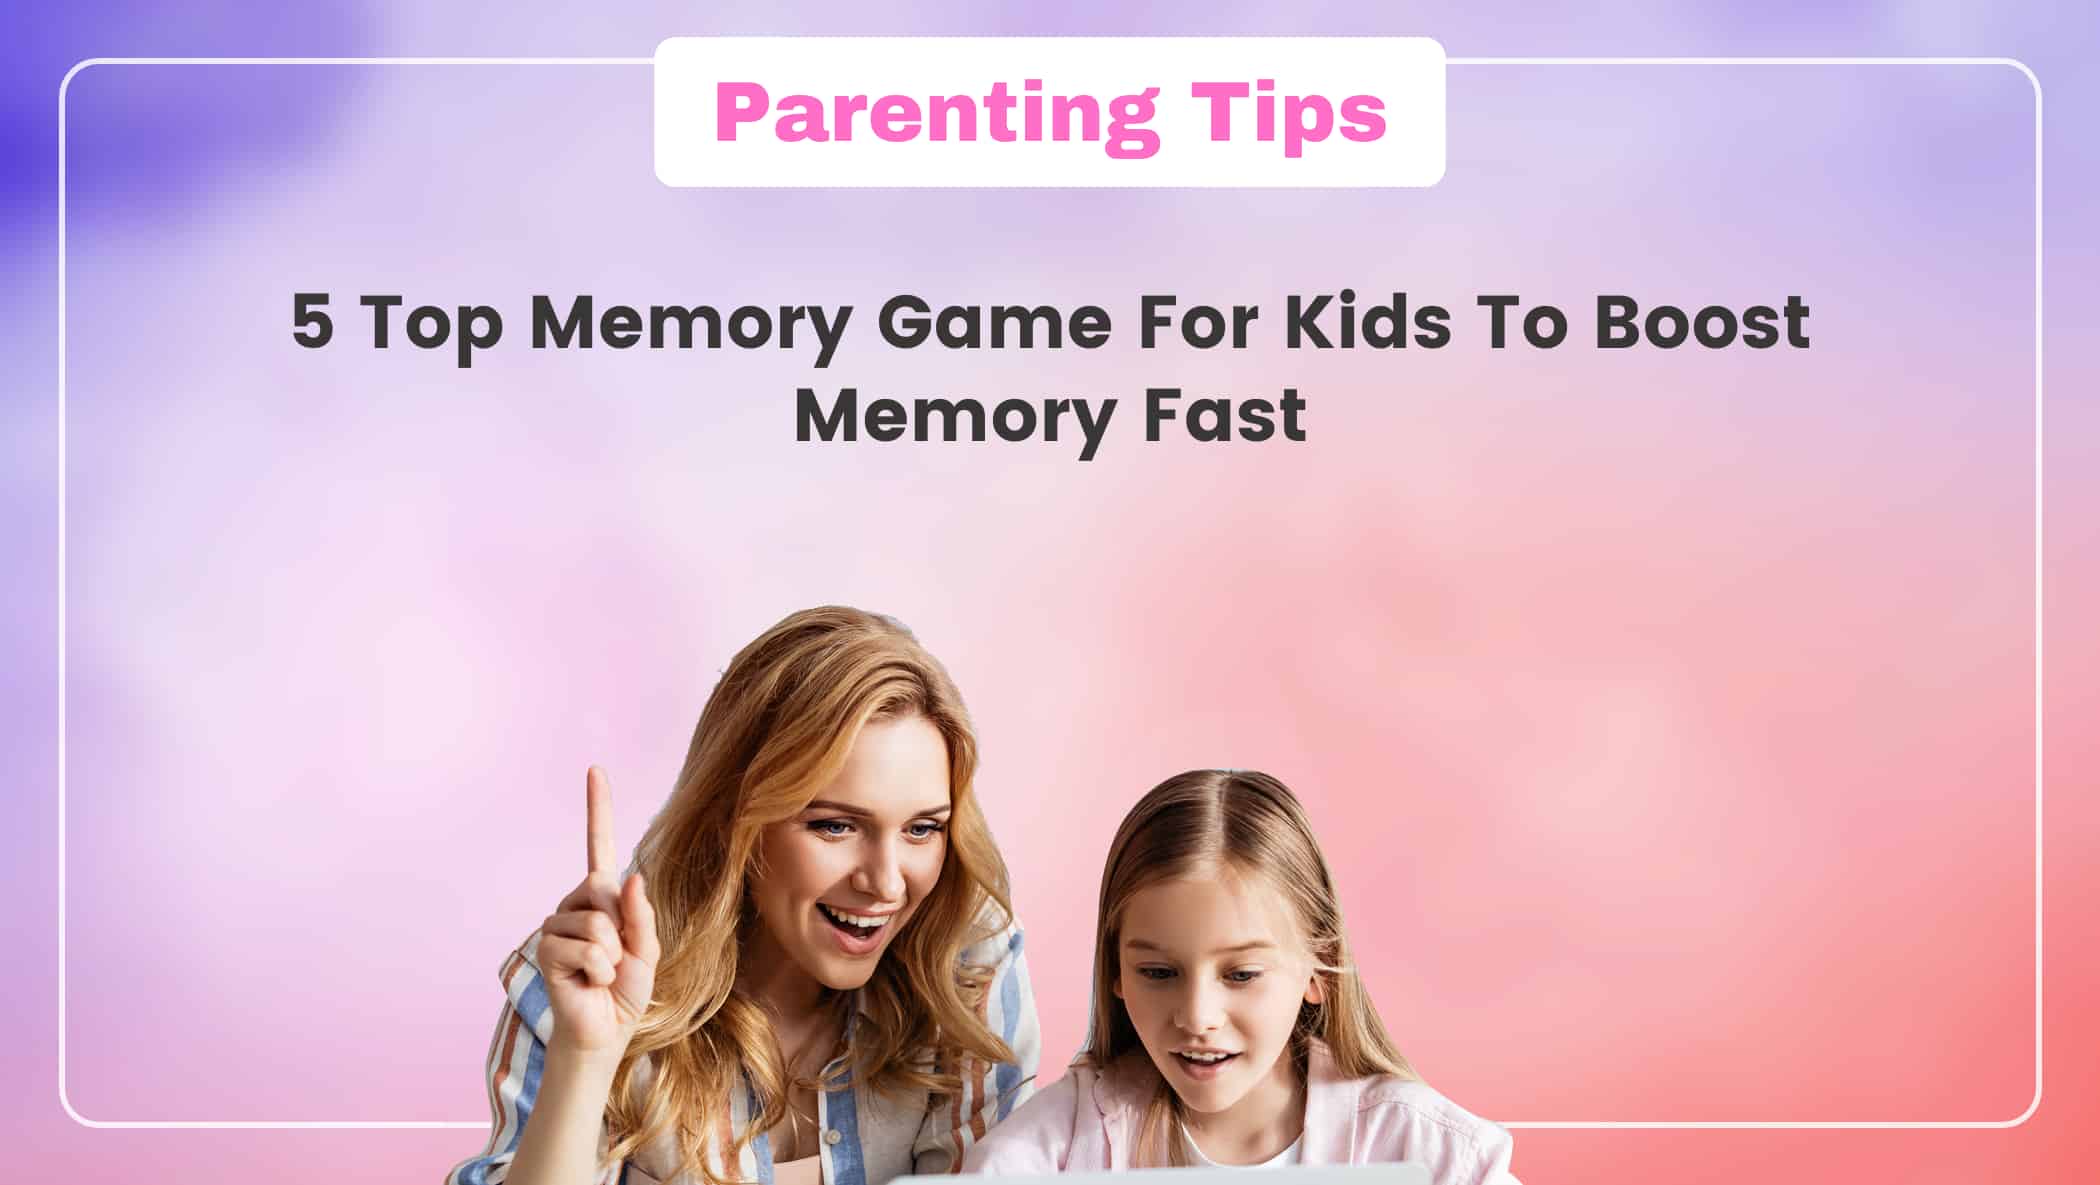 5 Top Memory Game For Kids To Boost Memory Fast Image